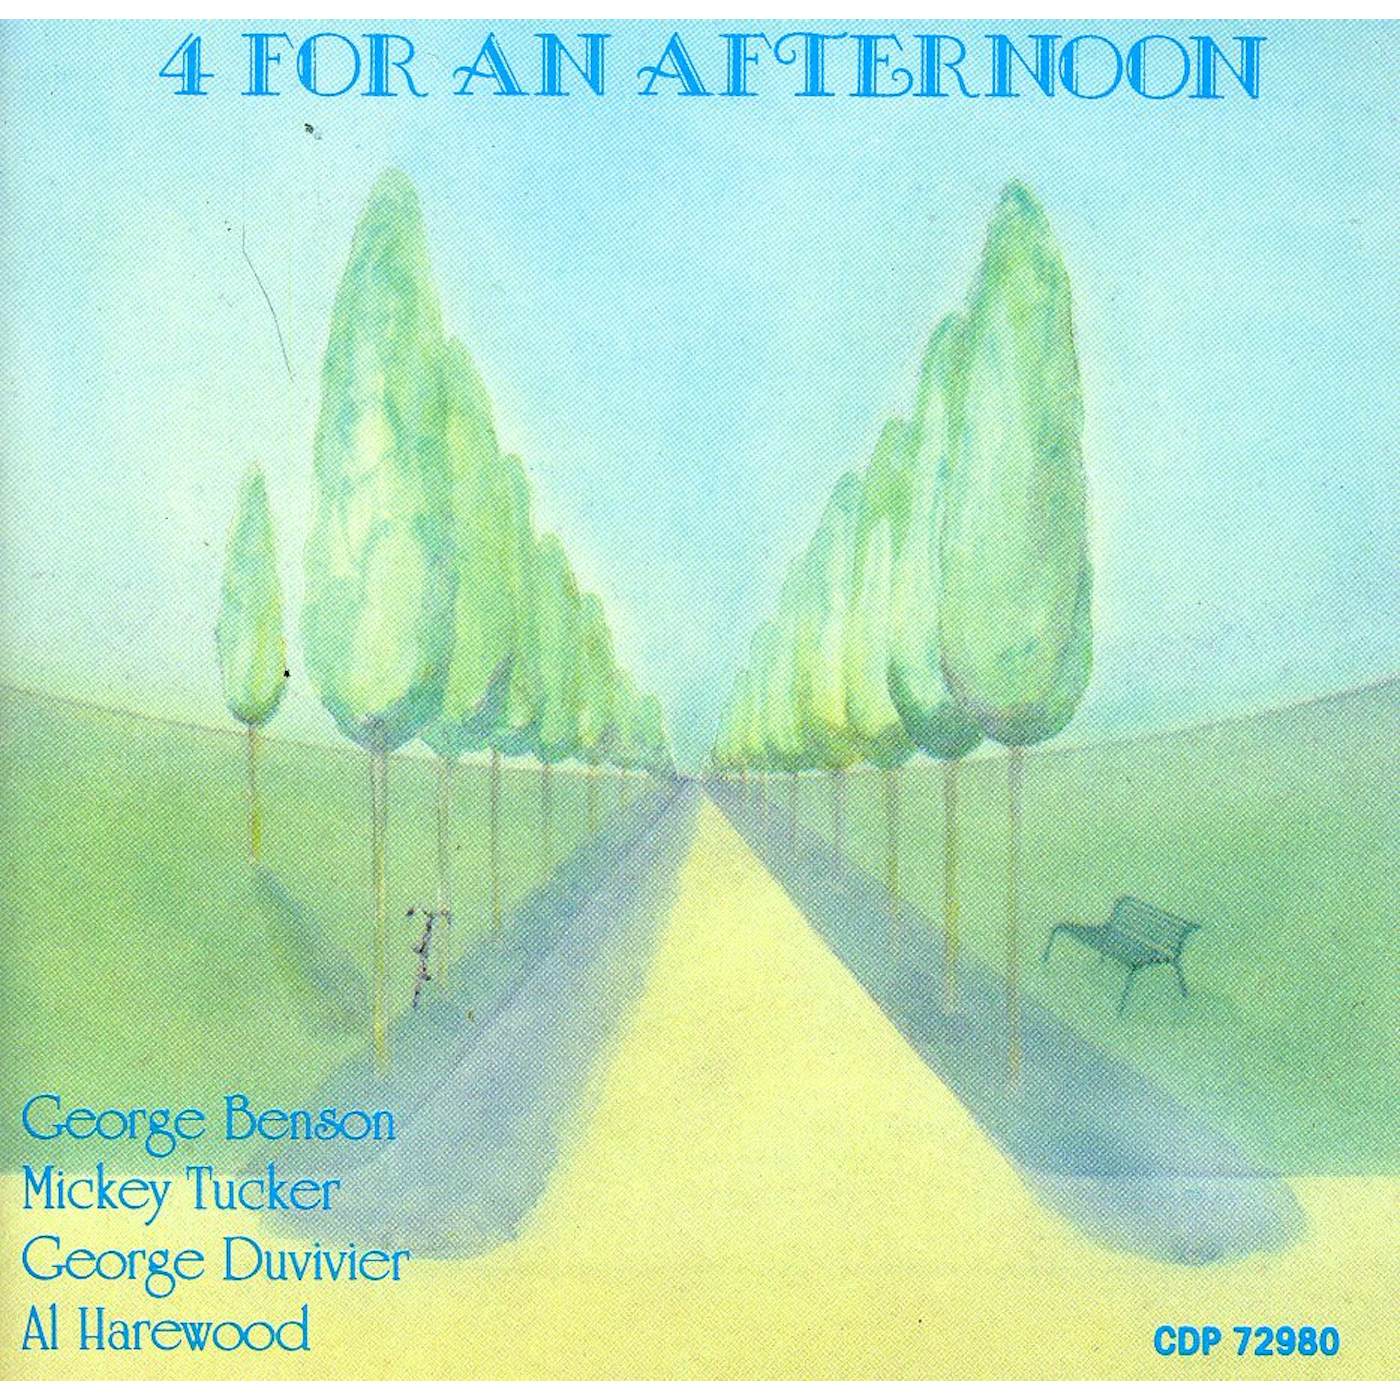 George Benson 4 FOR AN AFTERNOON CD